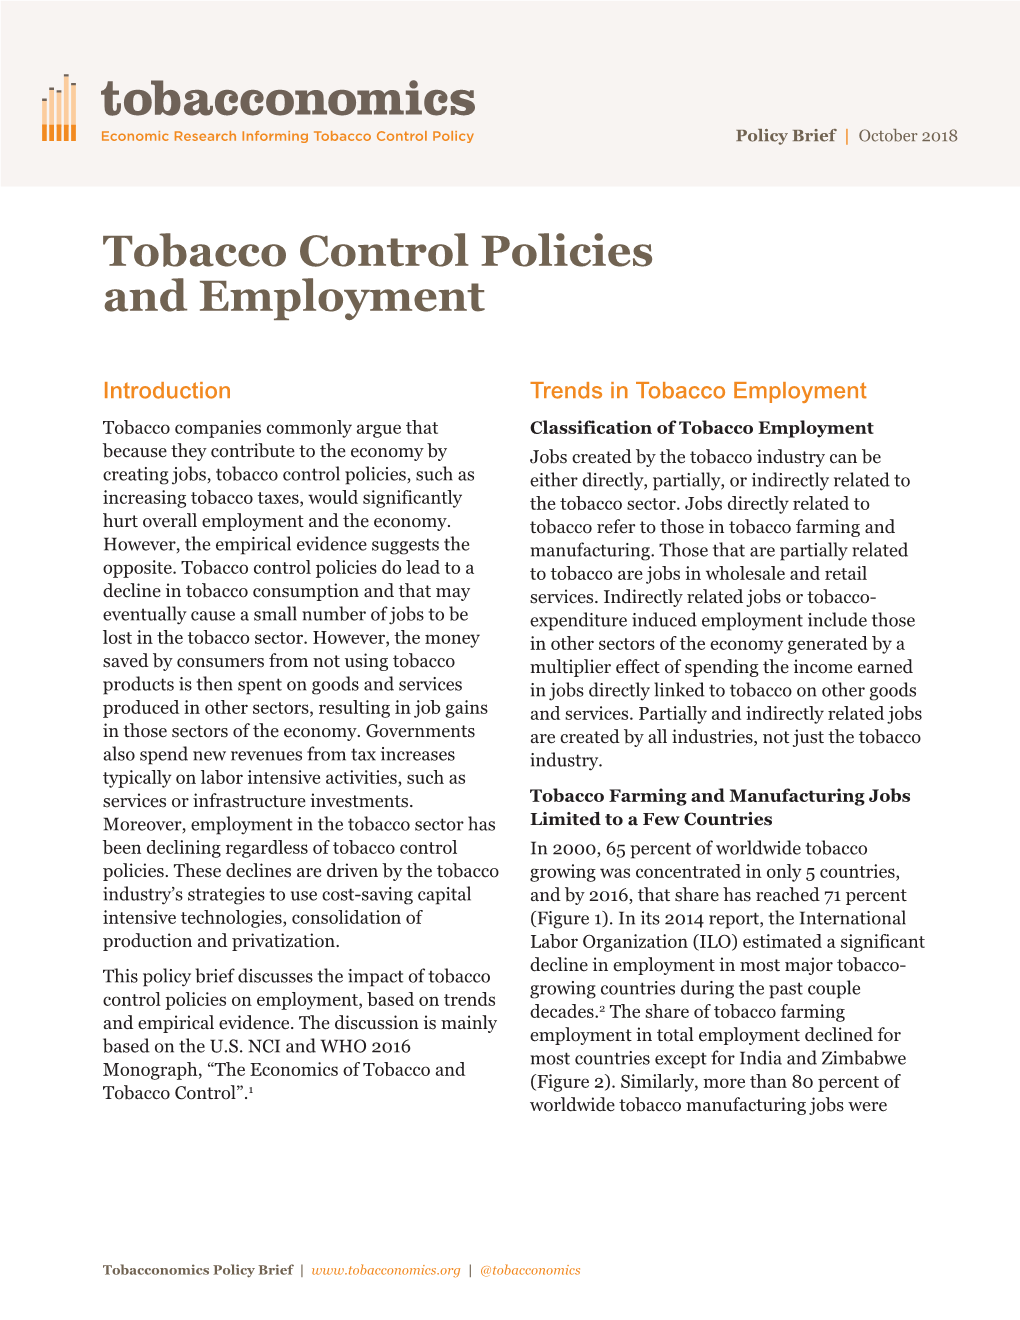 Tobacco Control Policies and Employment